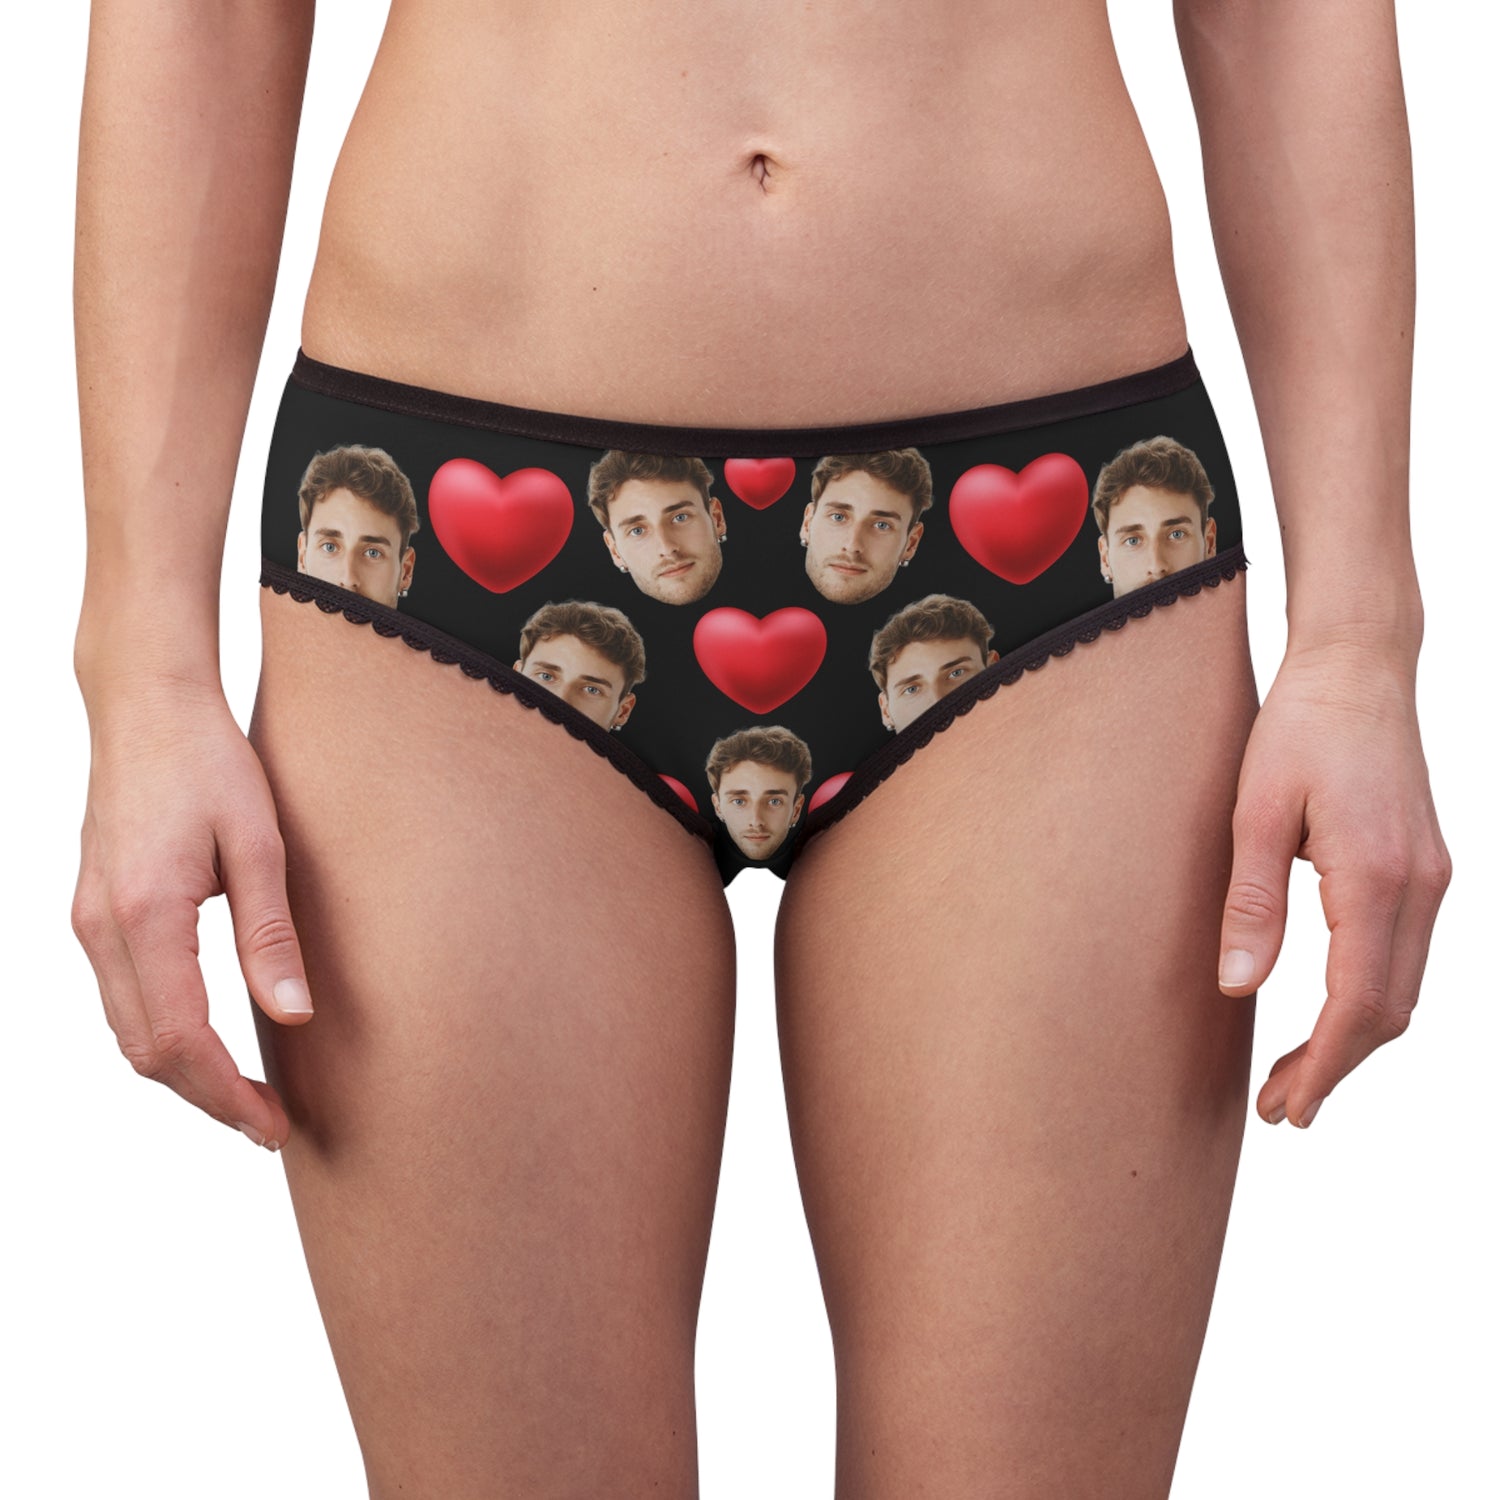 Funny Personalized Underwear For Women With Photo And Hearts